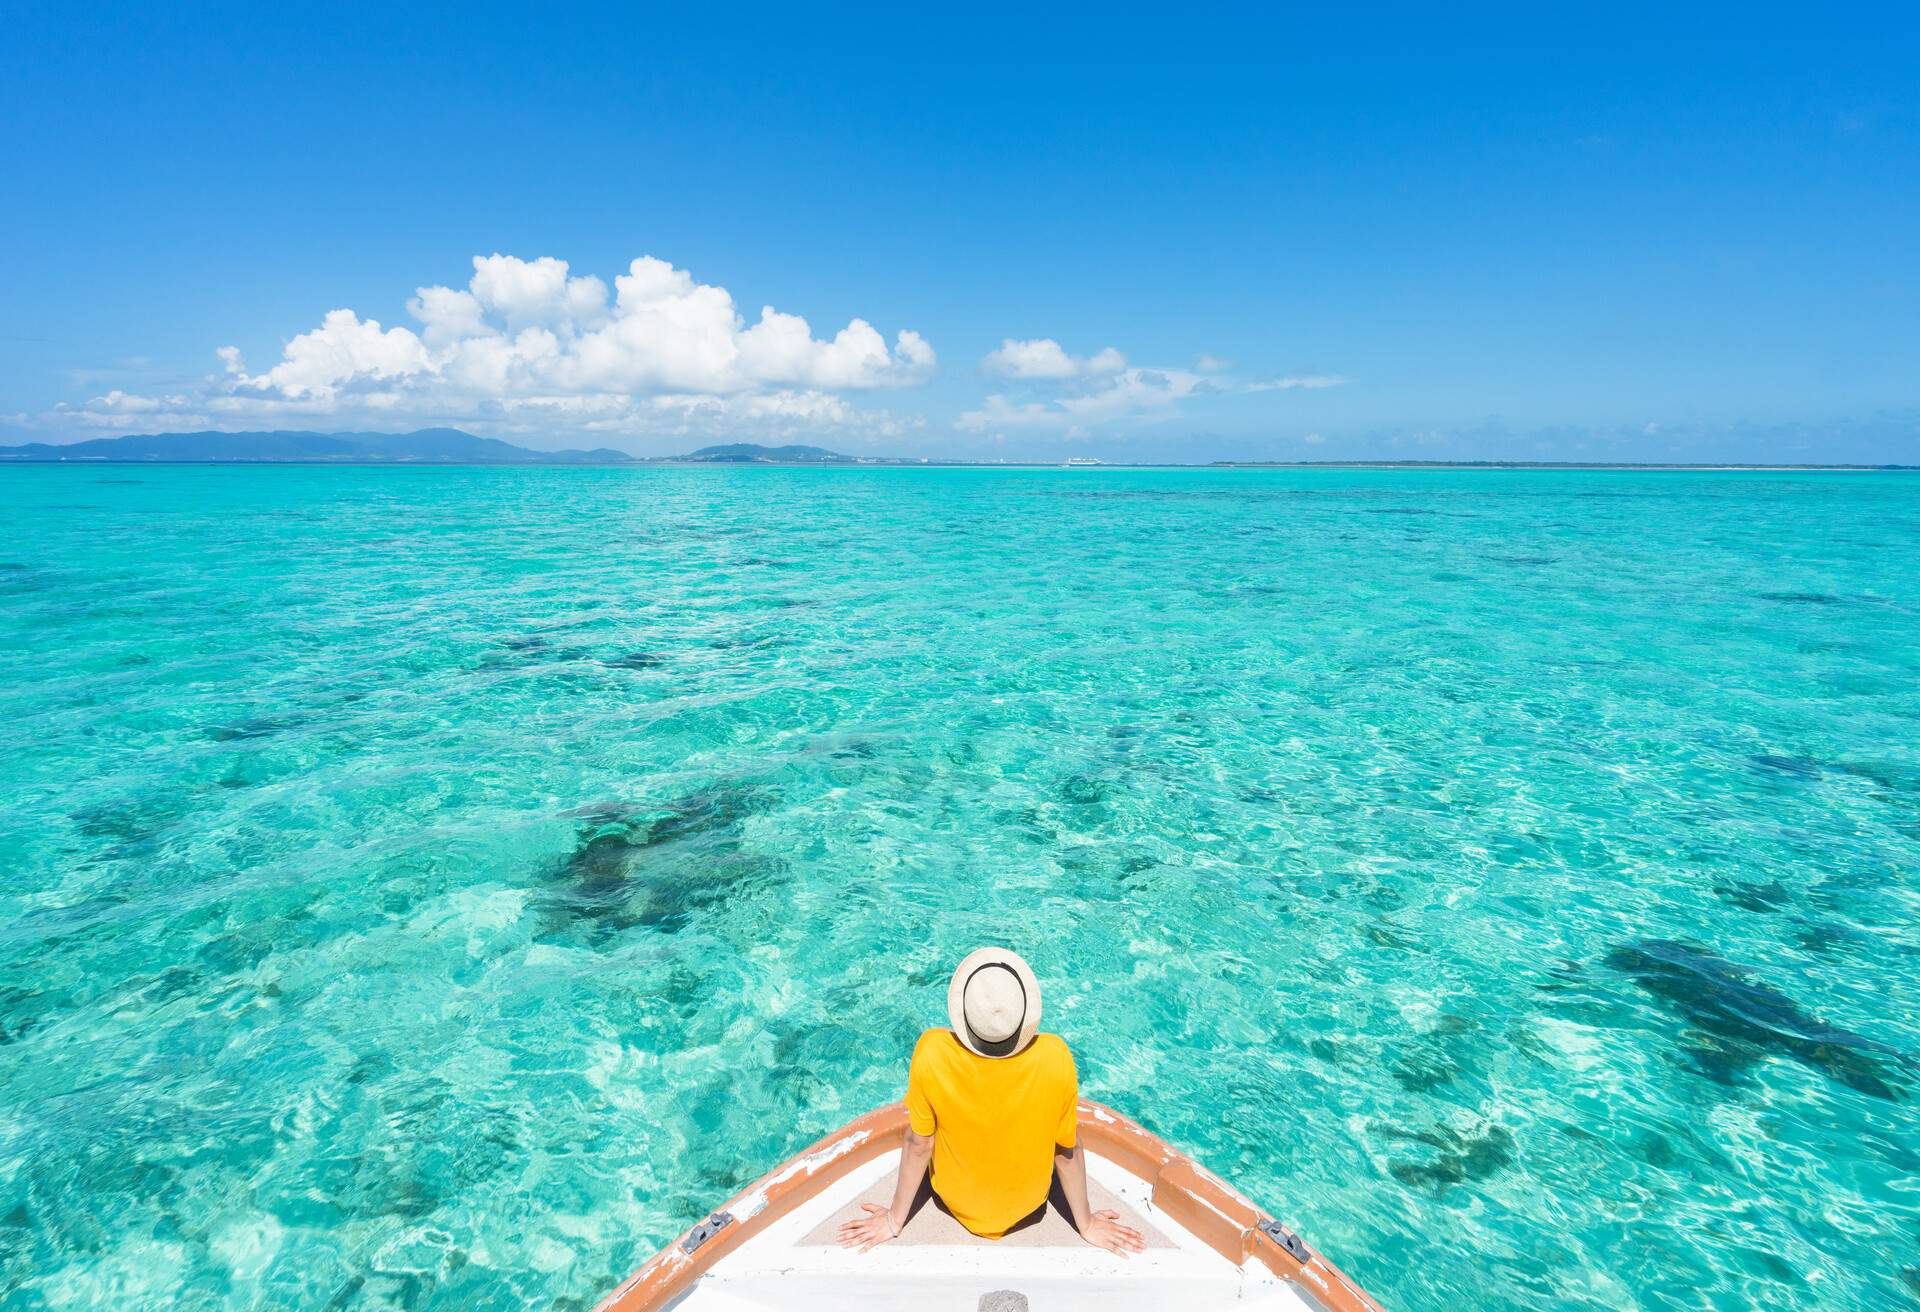 A man in a yellow shirt and a hat sitting on the prow of a boat, gazing out into the aquamarine waters.